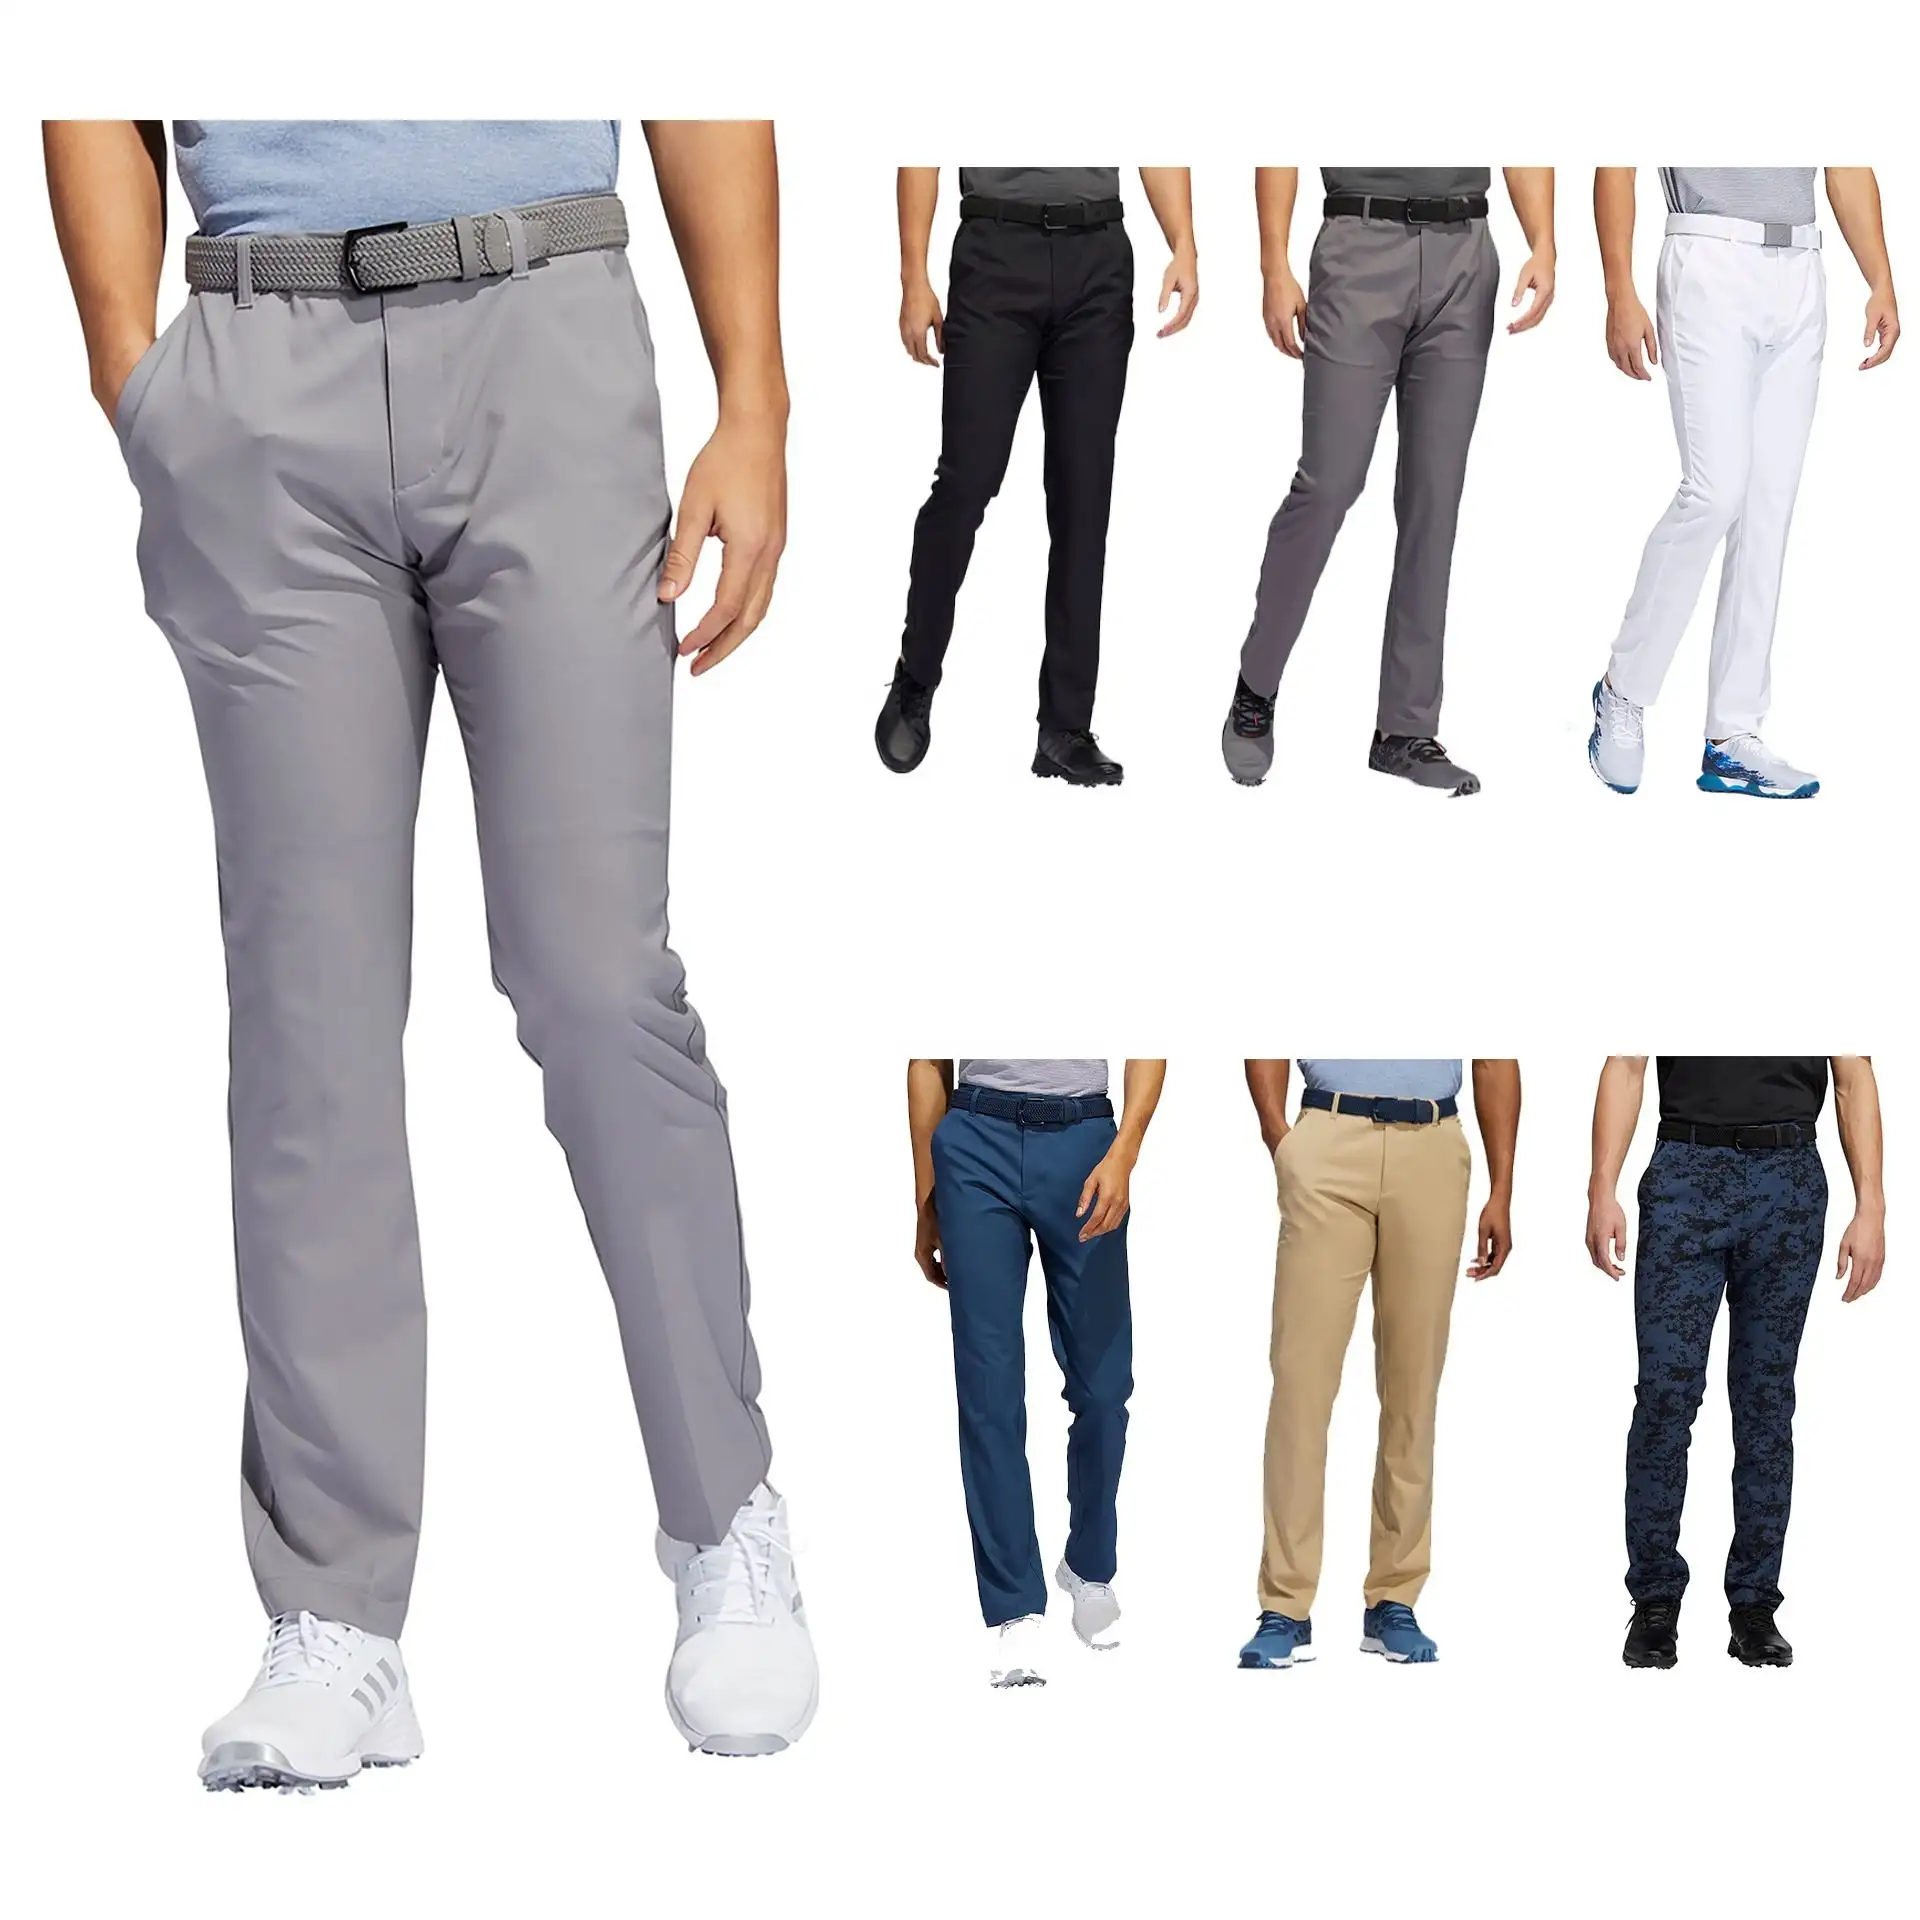 Customized high quality Original Long trousers men Hot Sale Men's Summer Thin Golf Pants Breathable Stretch Slim Fit Pants